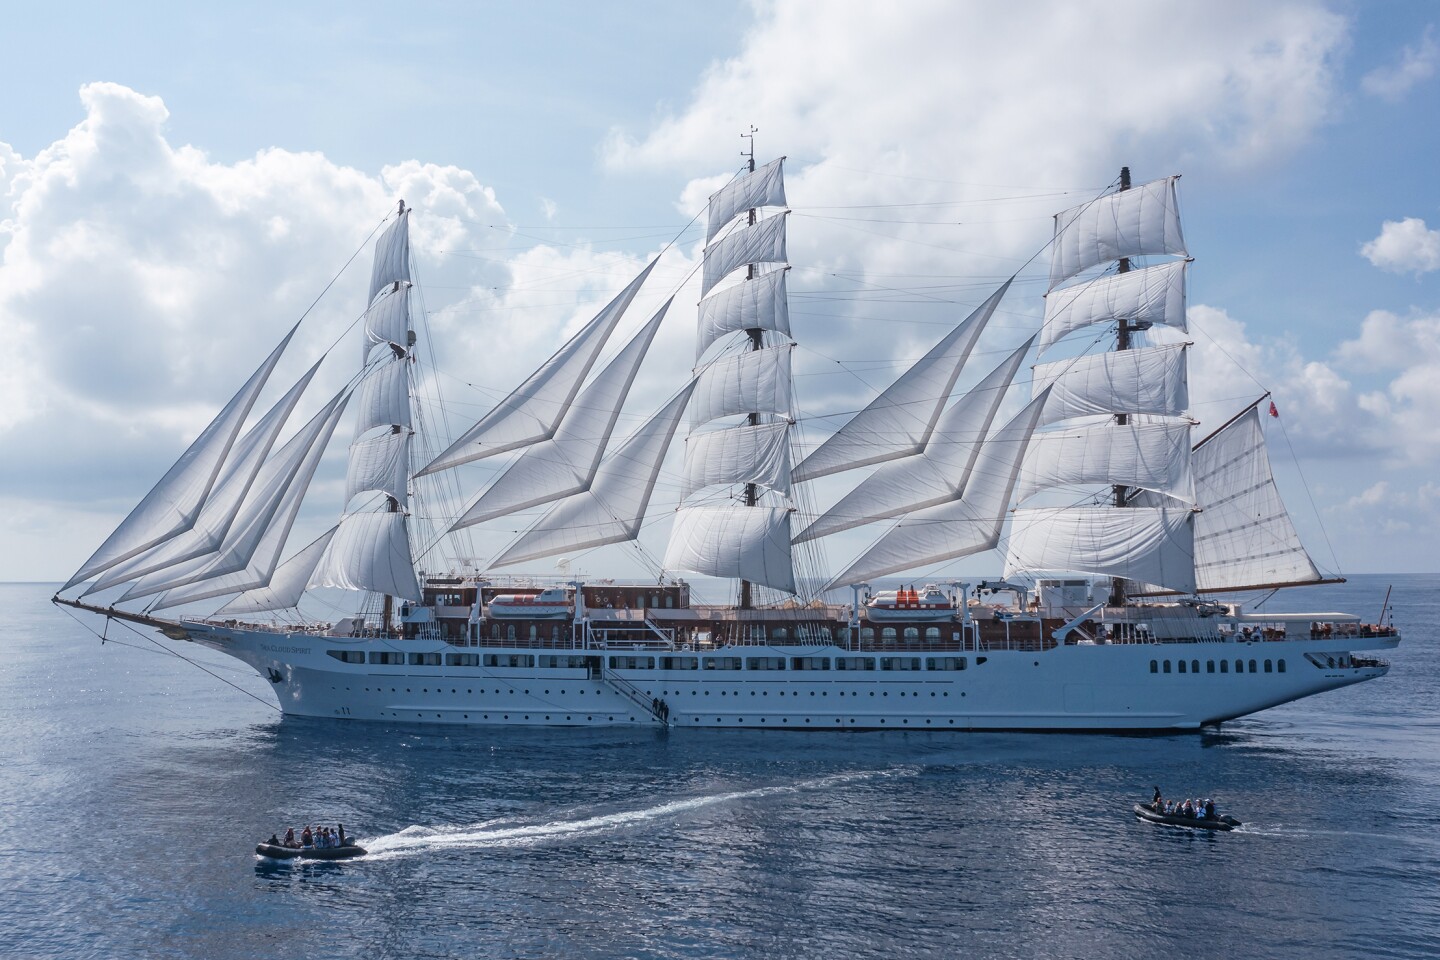 <h3>Lindblad Expeditions</h3> <p><b>Itinerary: Mediterranean Gems: Southern Italy and Sicily Aboard <i>Sea Cloud</i></b><br><b>Best for: Historic ship experience</b><br><b>Number of days: 10</b><br><b>Starting cost: $18,602 per person</b></p> <p>Passengers will immerse themselves in history as soon as they set foot on the 58-passenger <i>Sea Cloud</i> tall ship, built in 1931 for socialite Marjorie Merriweather Post and finance tycoon E.F. Hutton, and decorated with period antiques. Lindblad Expeditions is operating the vessel on several Mediterranean journeys in 2024, including this <a class="Link" href="https://fave.co/3LMPSZa" rel="noopener">Southern Italy and Sicily sailing</a>. There will be a Lindblad–National Geographic–certified photo instructor to help guests get perfect photos of the ship’s iconic sails and of the enchanting sights on an off-the-beaten-path itinerary to Puglia, Sicily, and the Amalfi Coast, sailing from Dubrovnik to Naples. Highlights include a private lunch at Castello degli Schiavi, an 18th-century castle used as a filming location in <i>The Godfather</i> movies.</p>